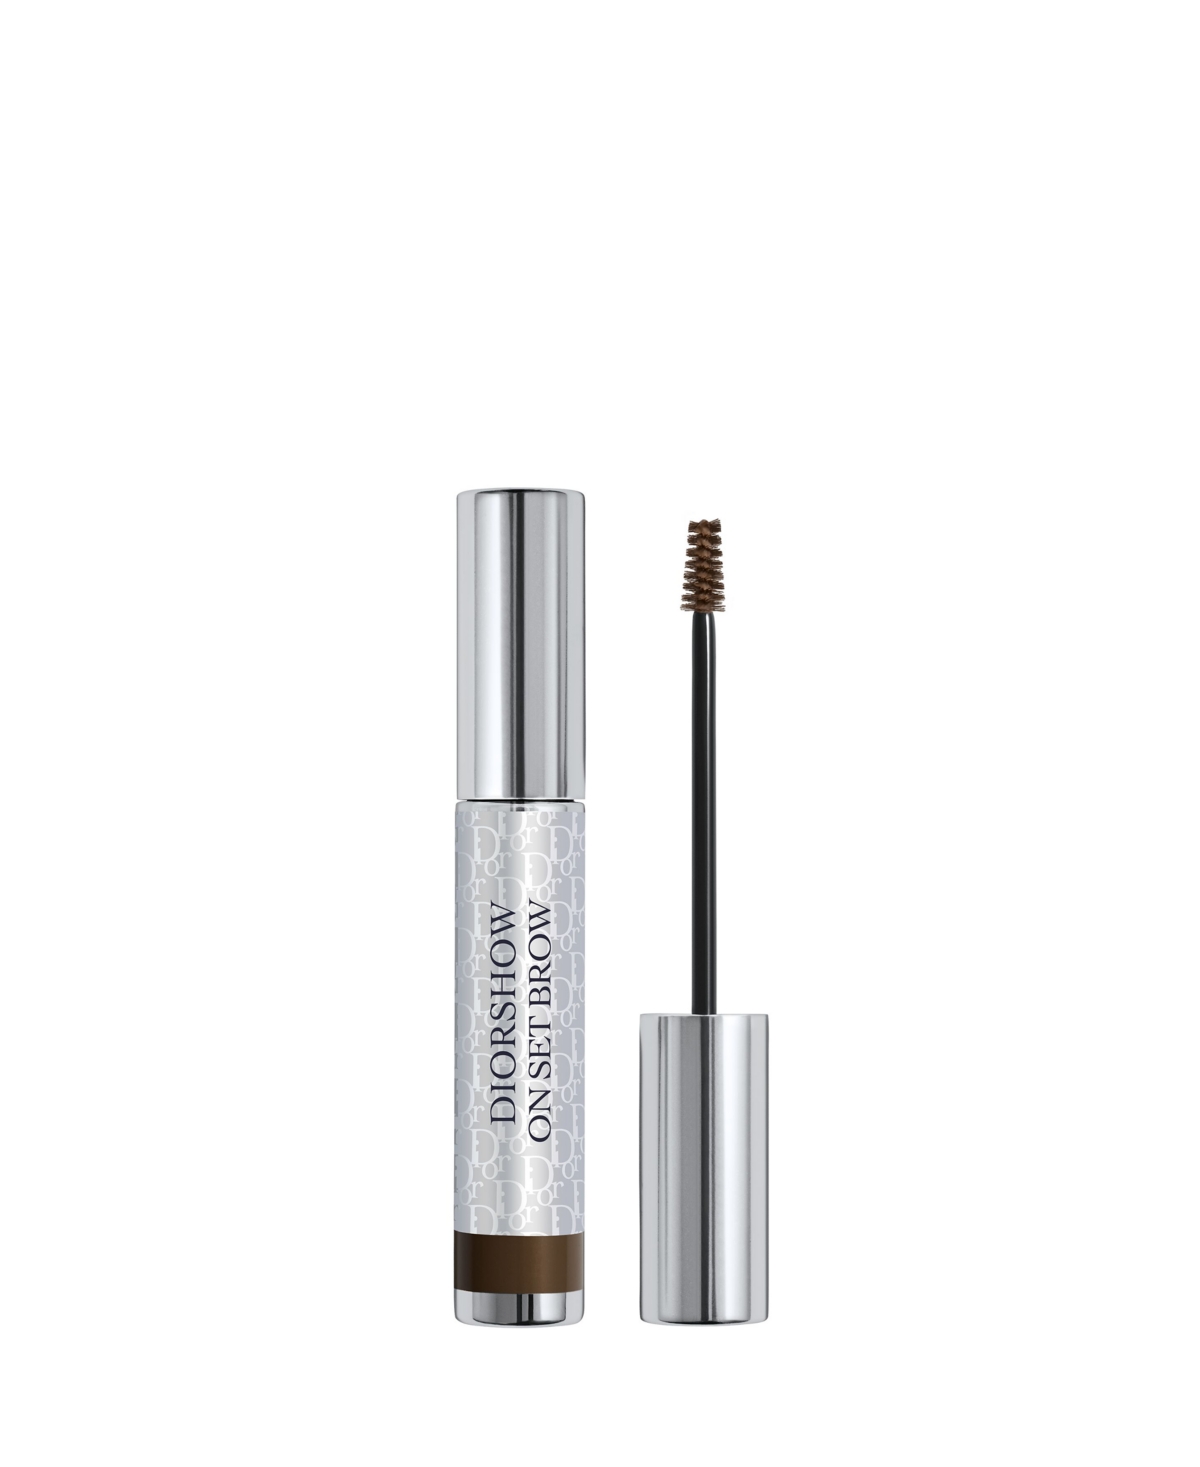 Dior Show On Set Brow Gel In Dark Brown (for Dark Brown Eyebrows With